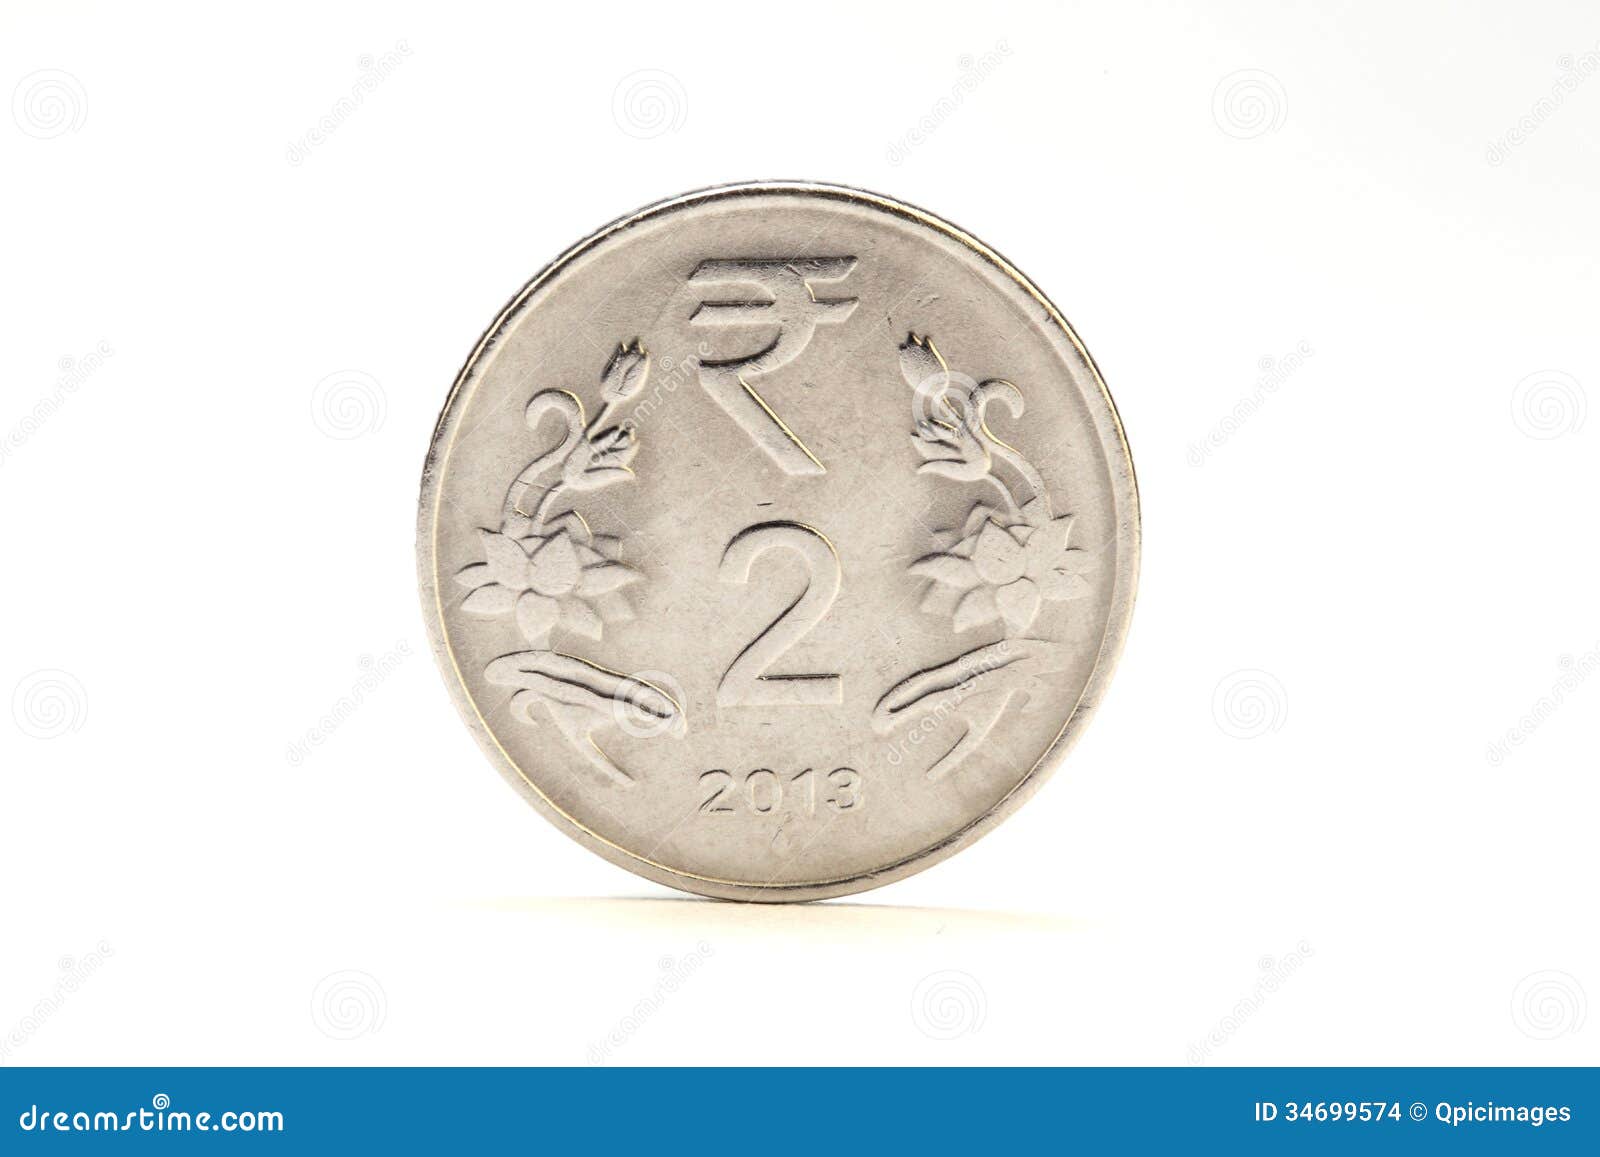 Two Rupee Indian Coin On White Stock Images - Image: 34699574